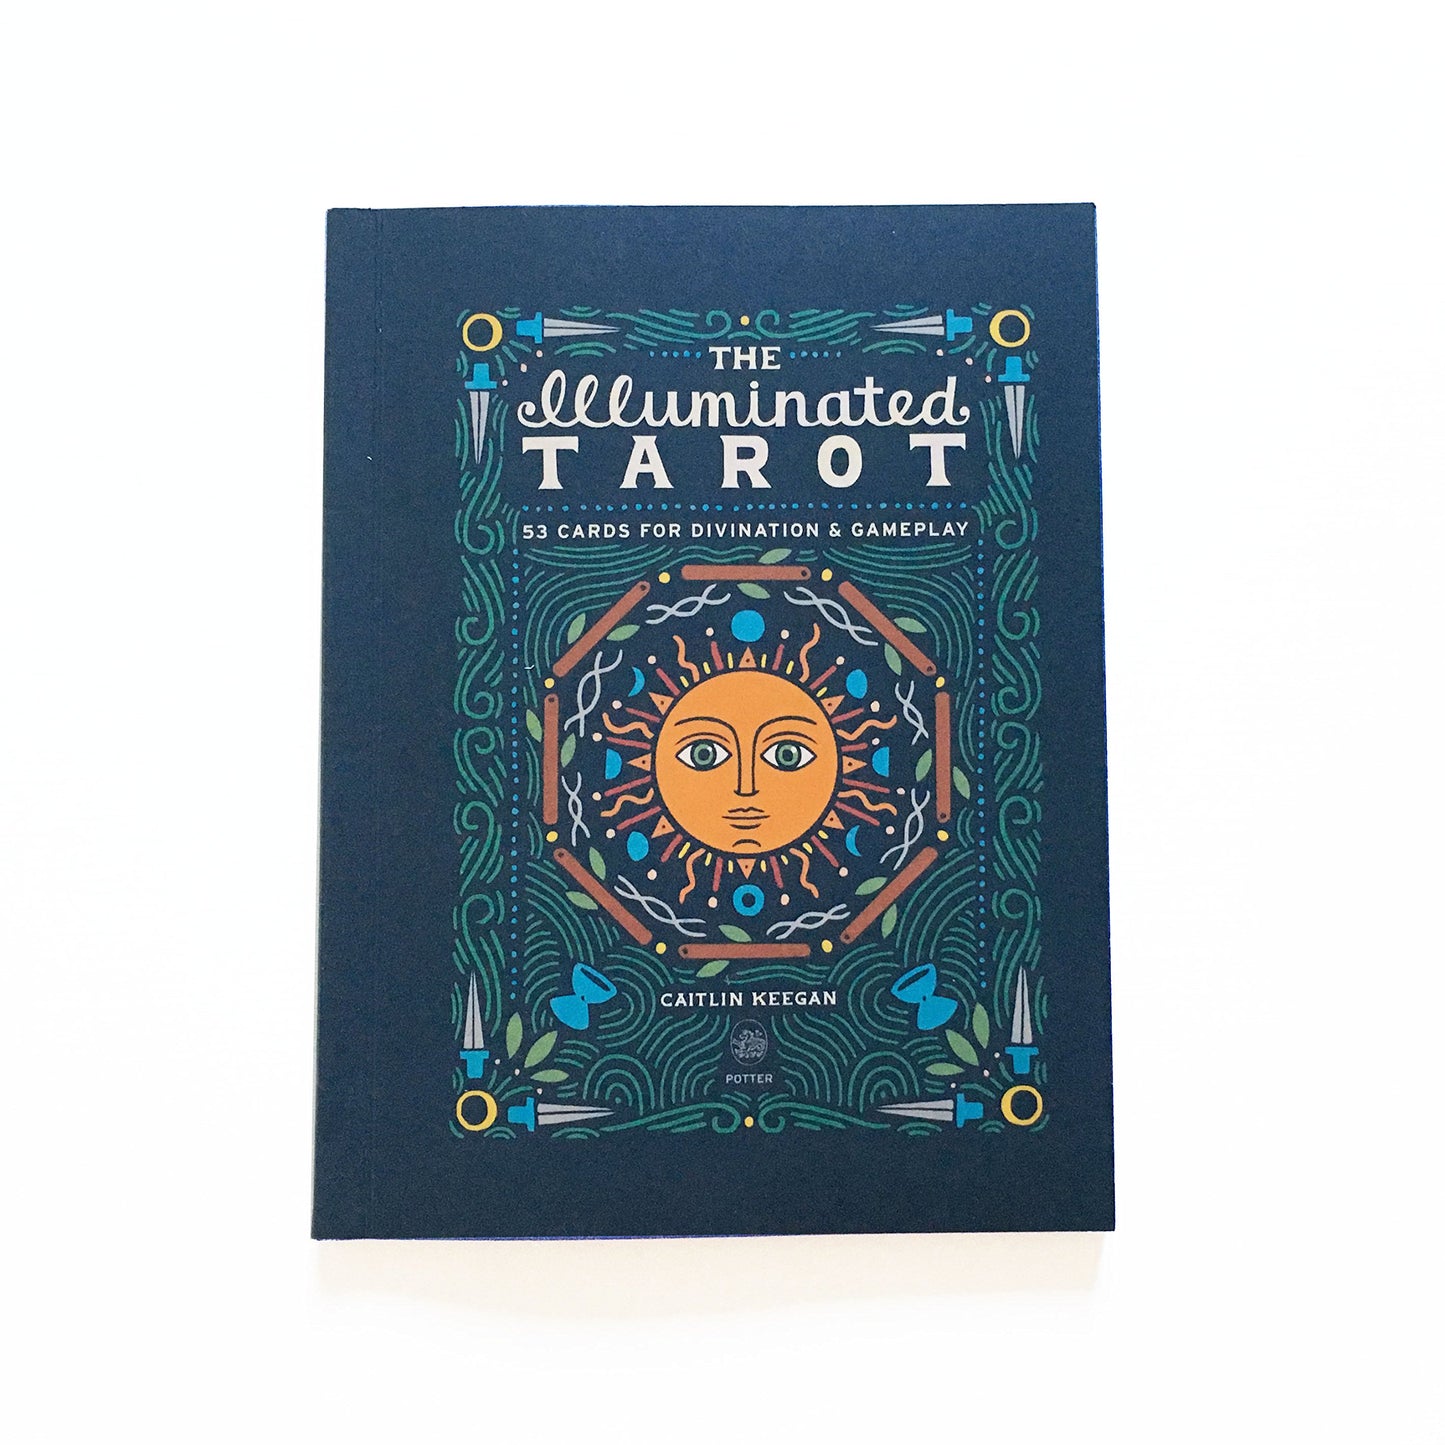 THE ILLUMINATED TAROT, 53 CARDS FOR DIVINATION & GAMEPLAY By CAITLIN KEEGAN